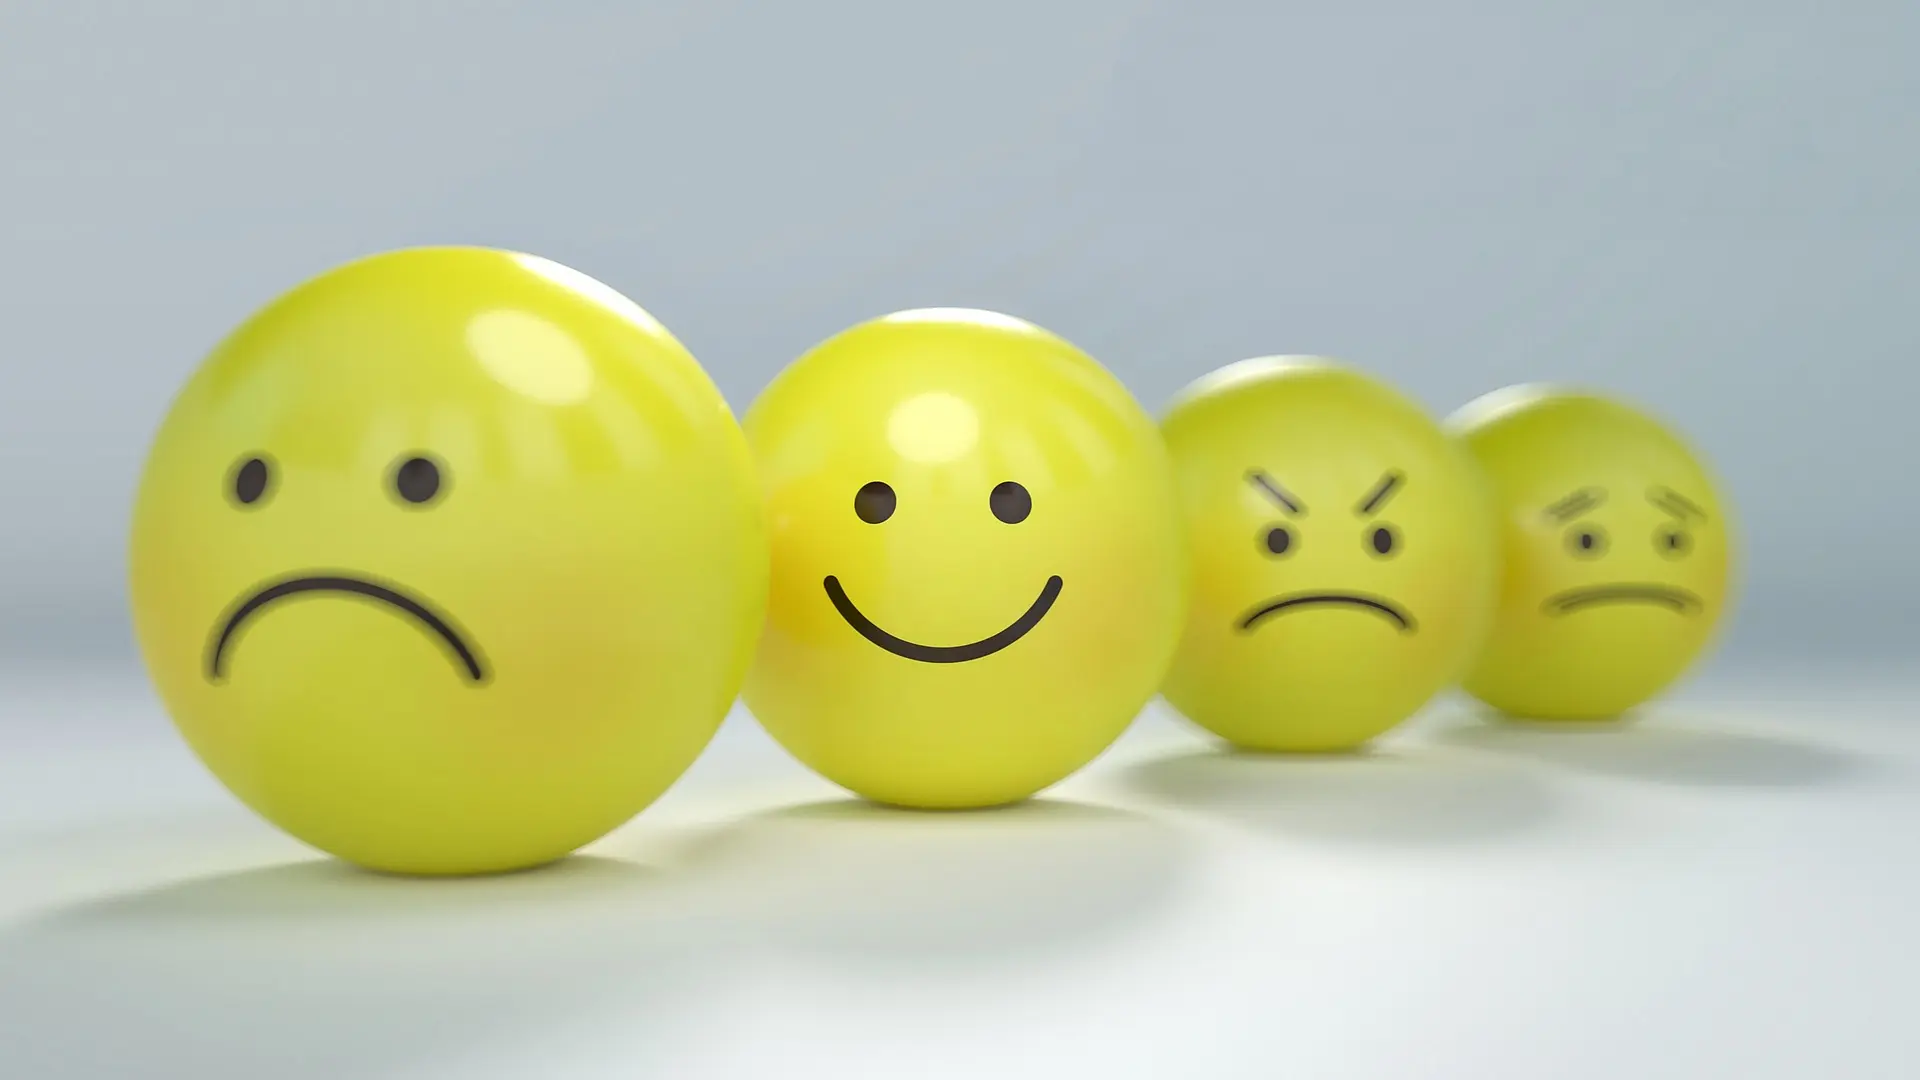 A set of emotions drawn on some colourful yellow balls